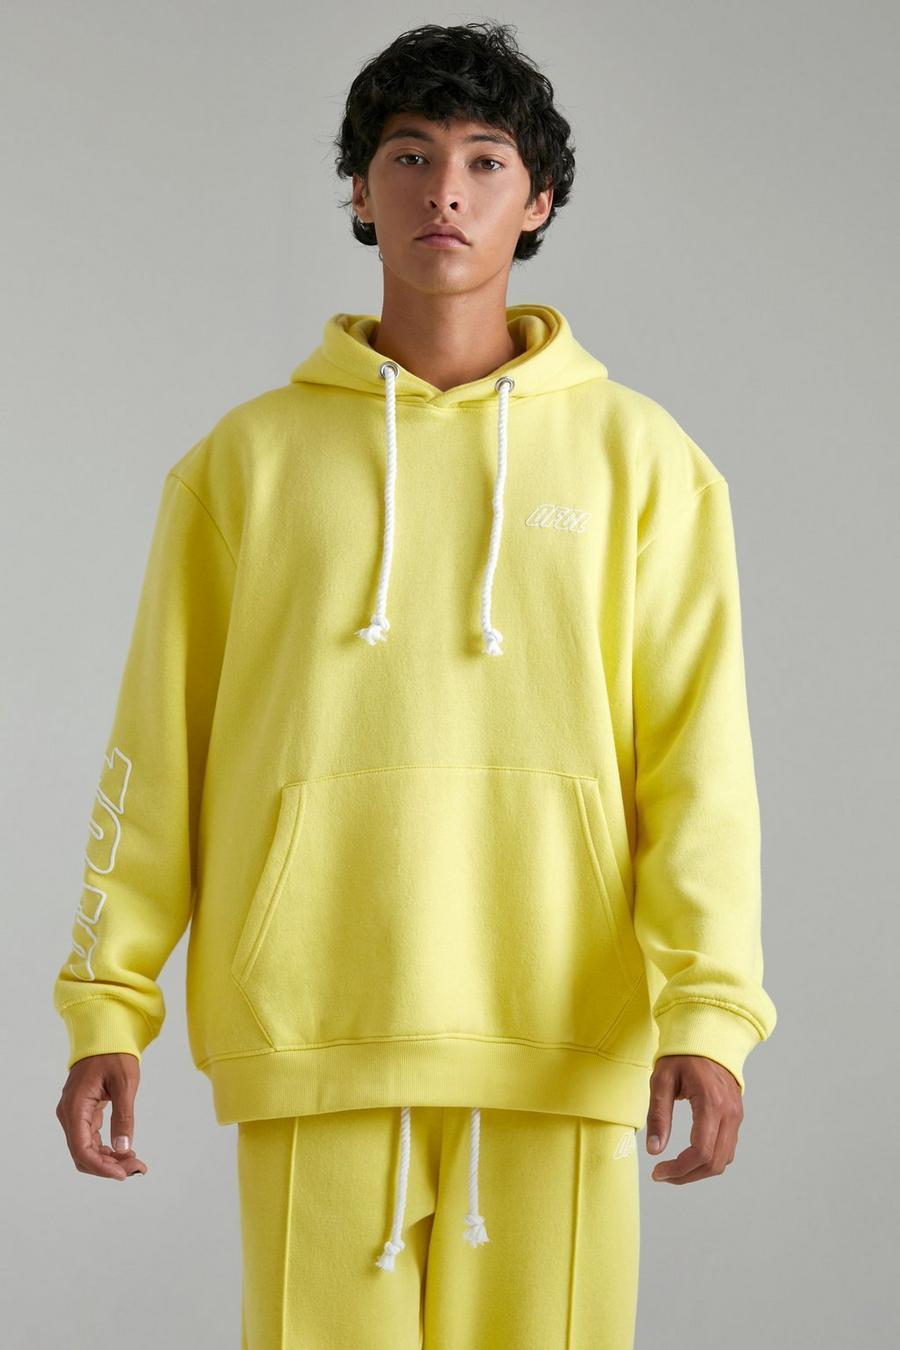 Yellow Oversized Ofcl Hoodie